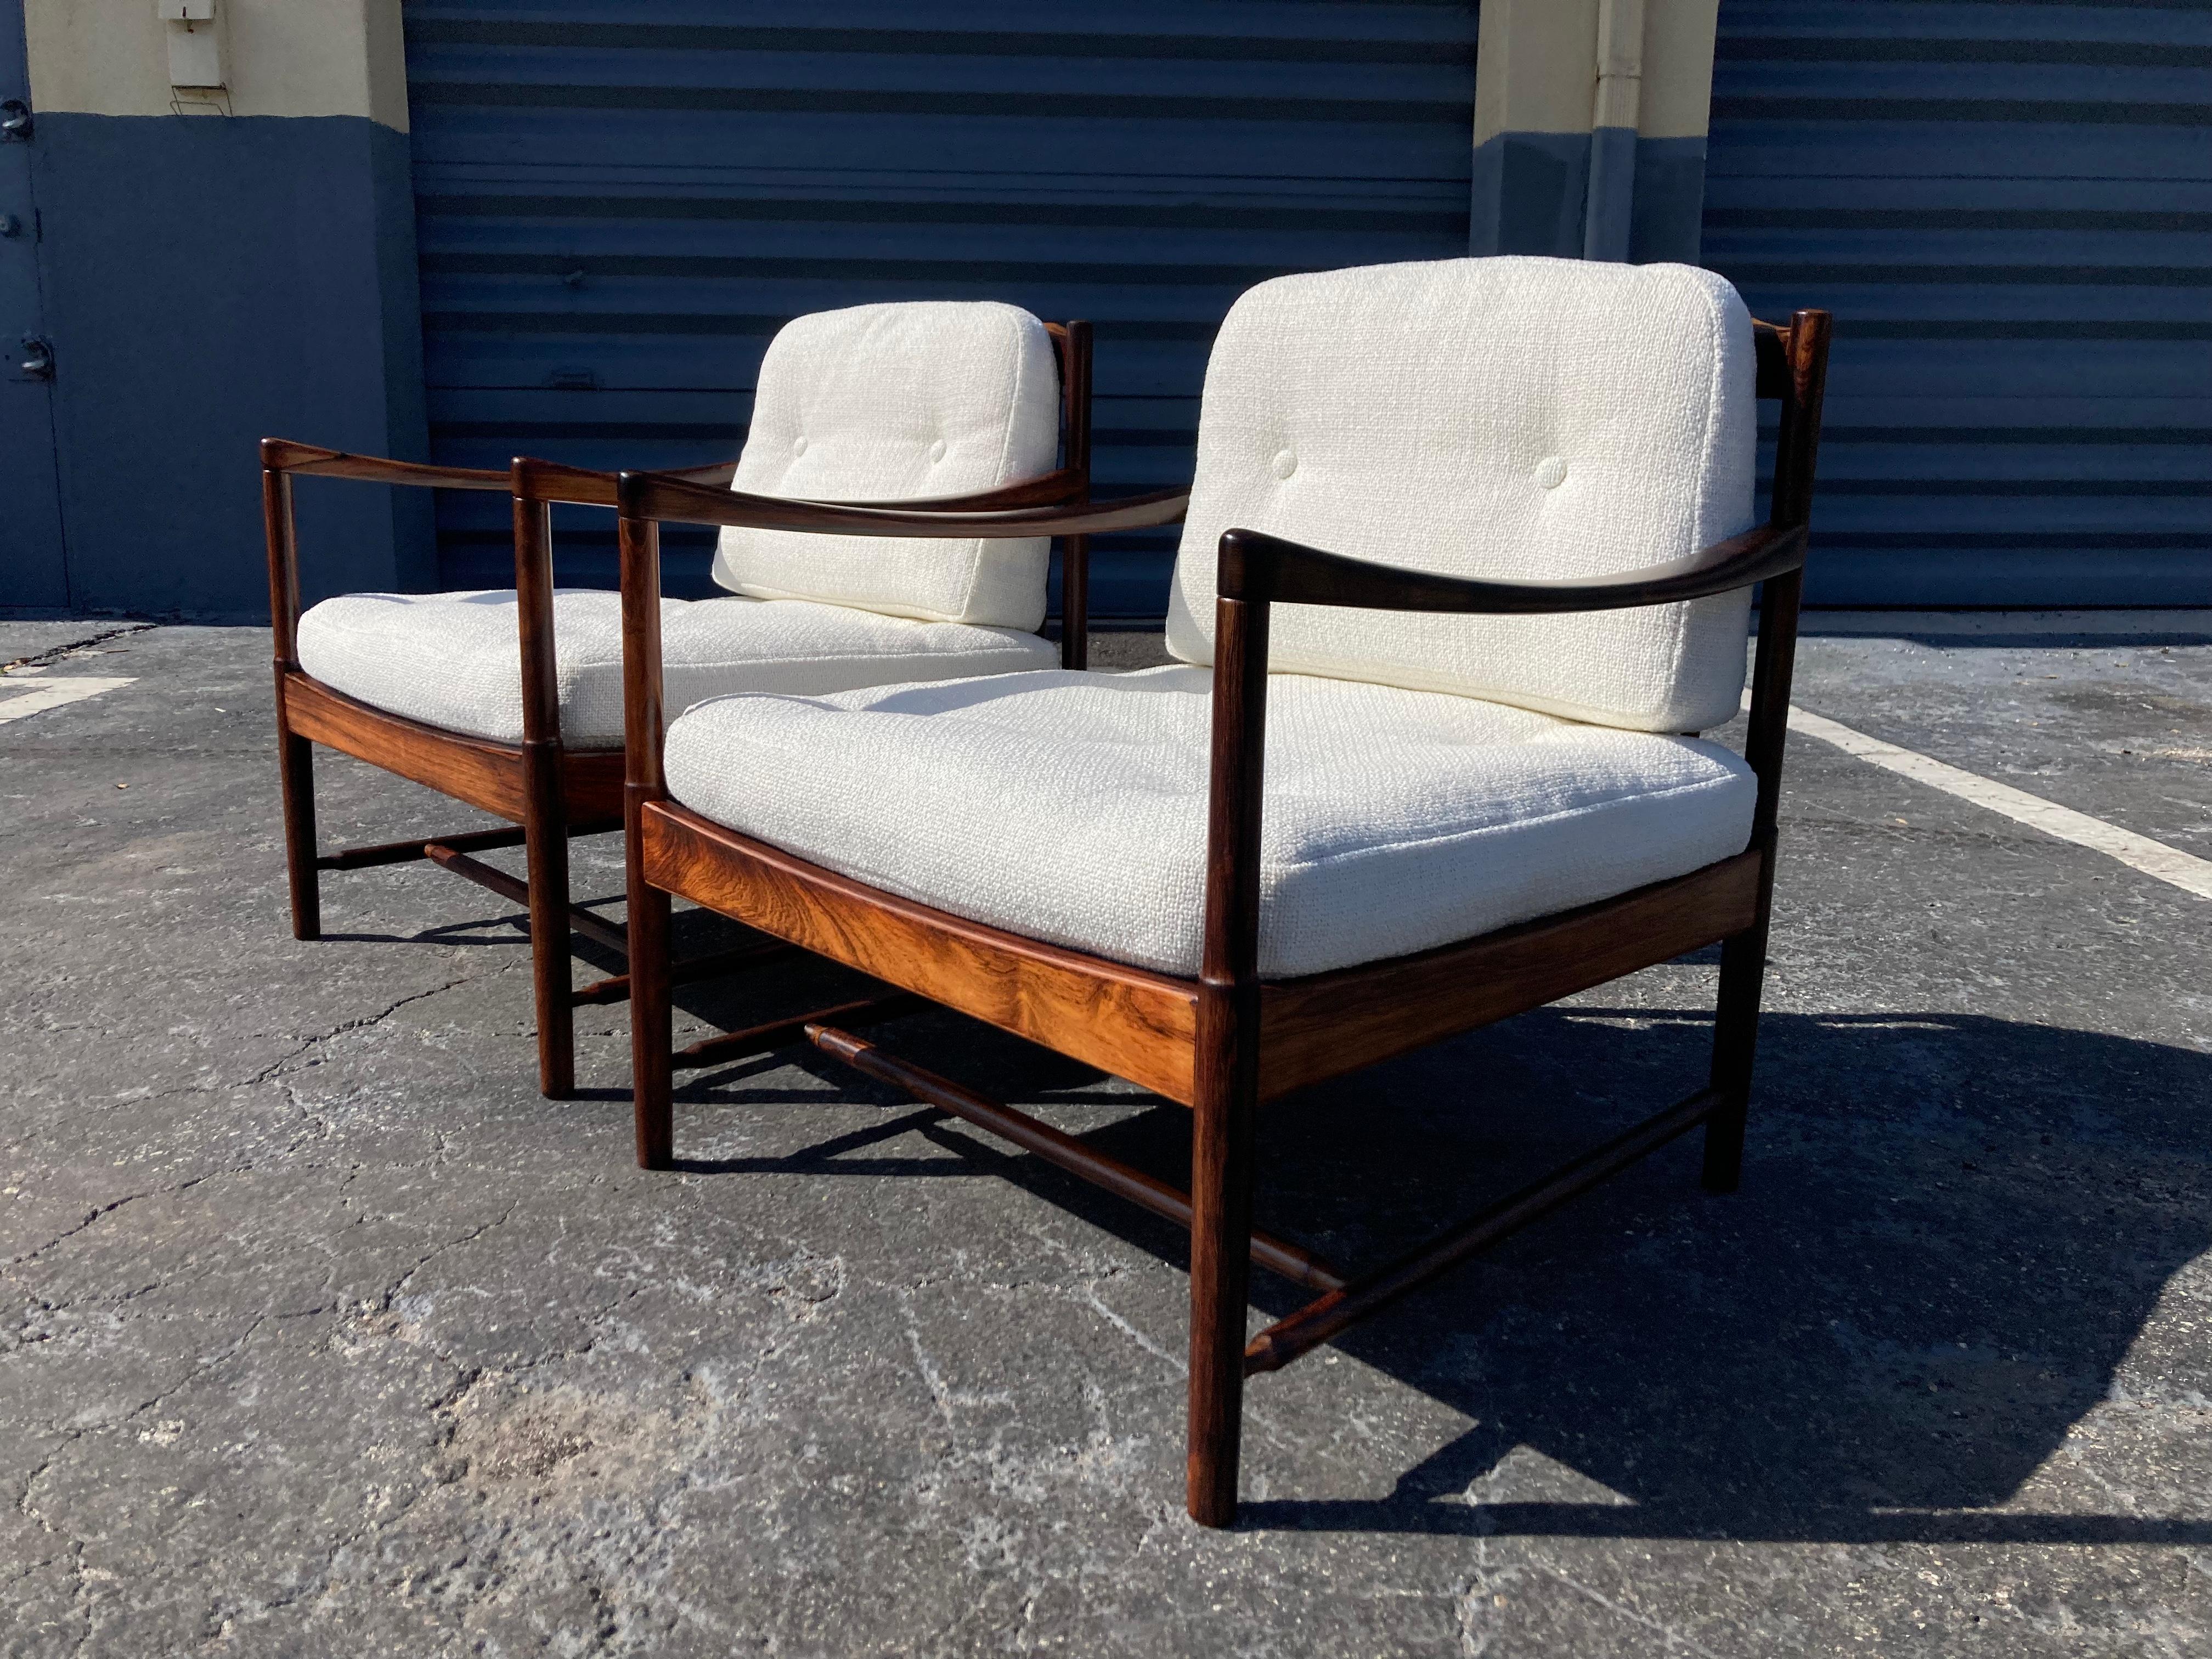 Mid-Century Modern Pair of Rosewood Lounge Chairs Attributed to Kofod Larsen, Danish Modern For Sale